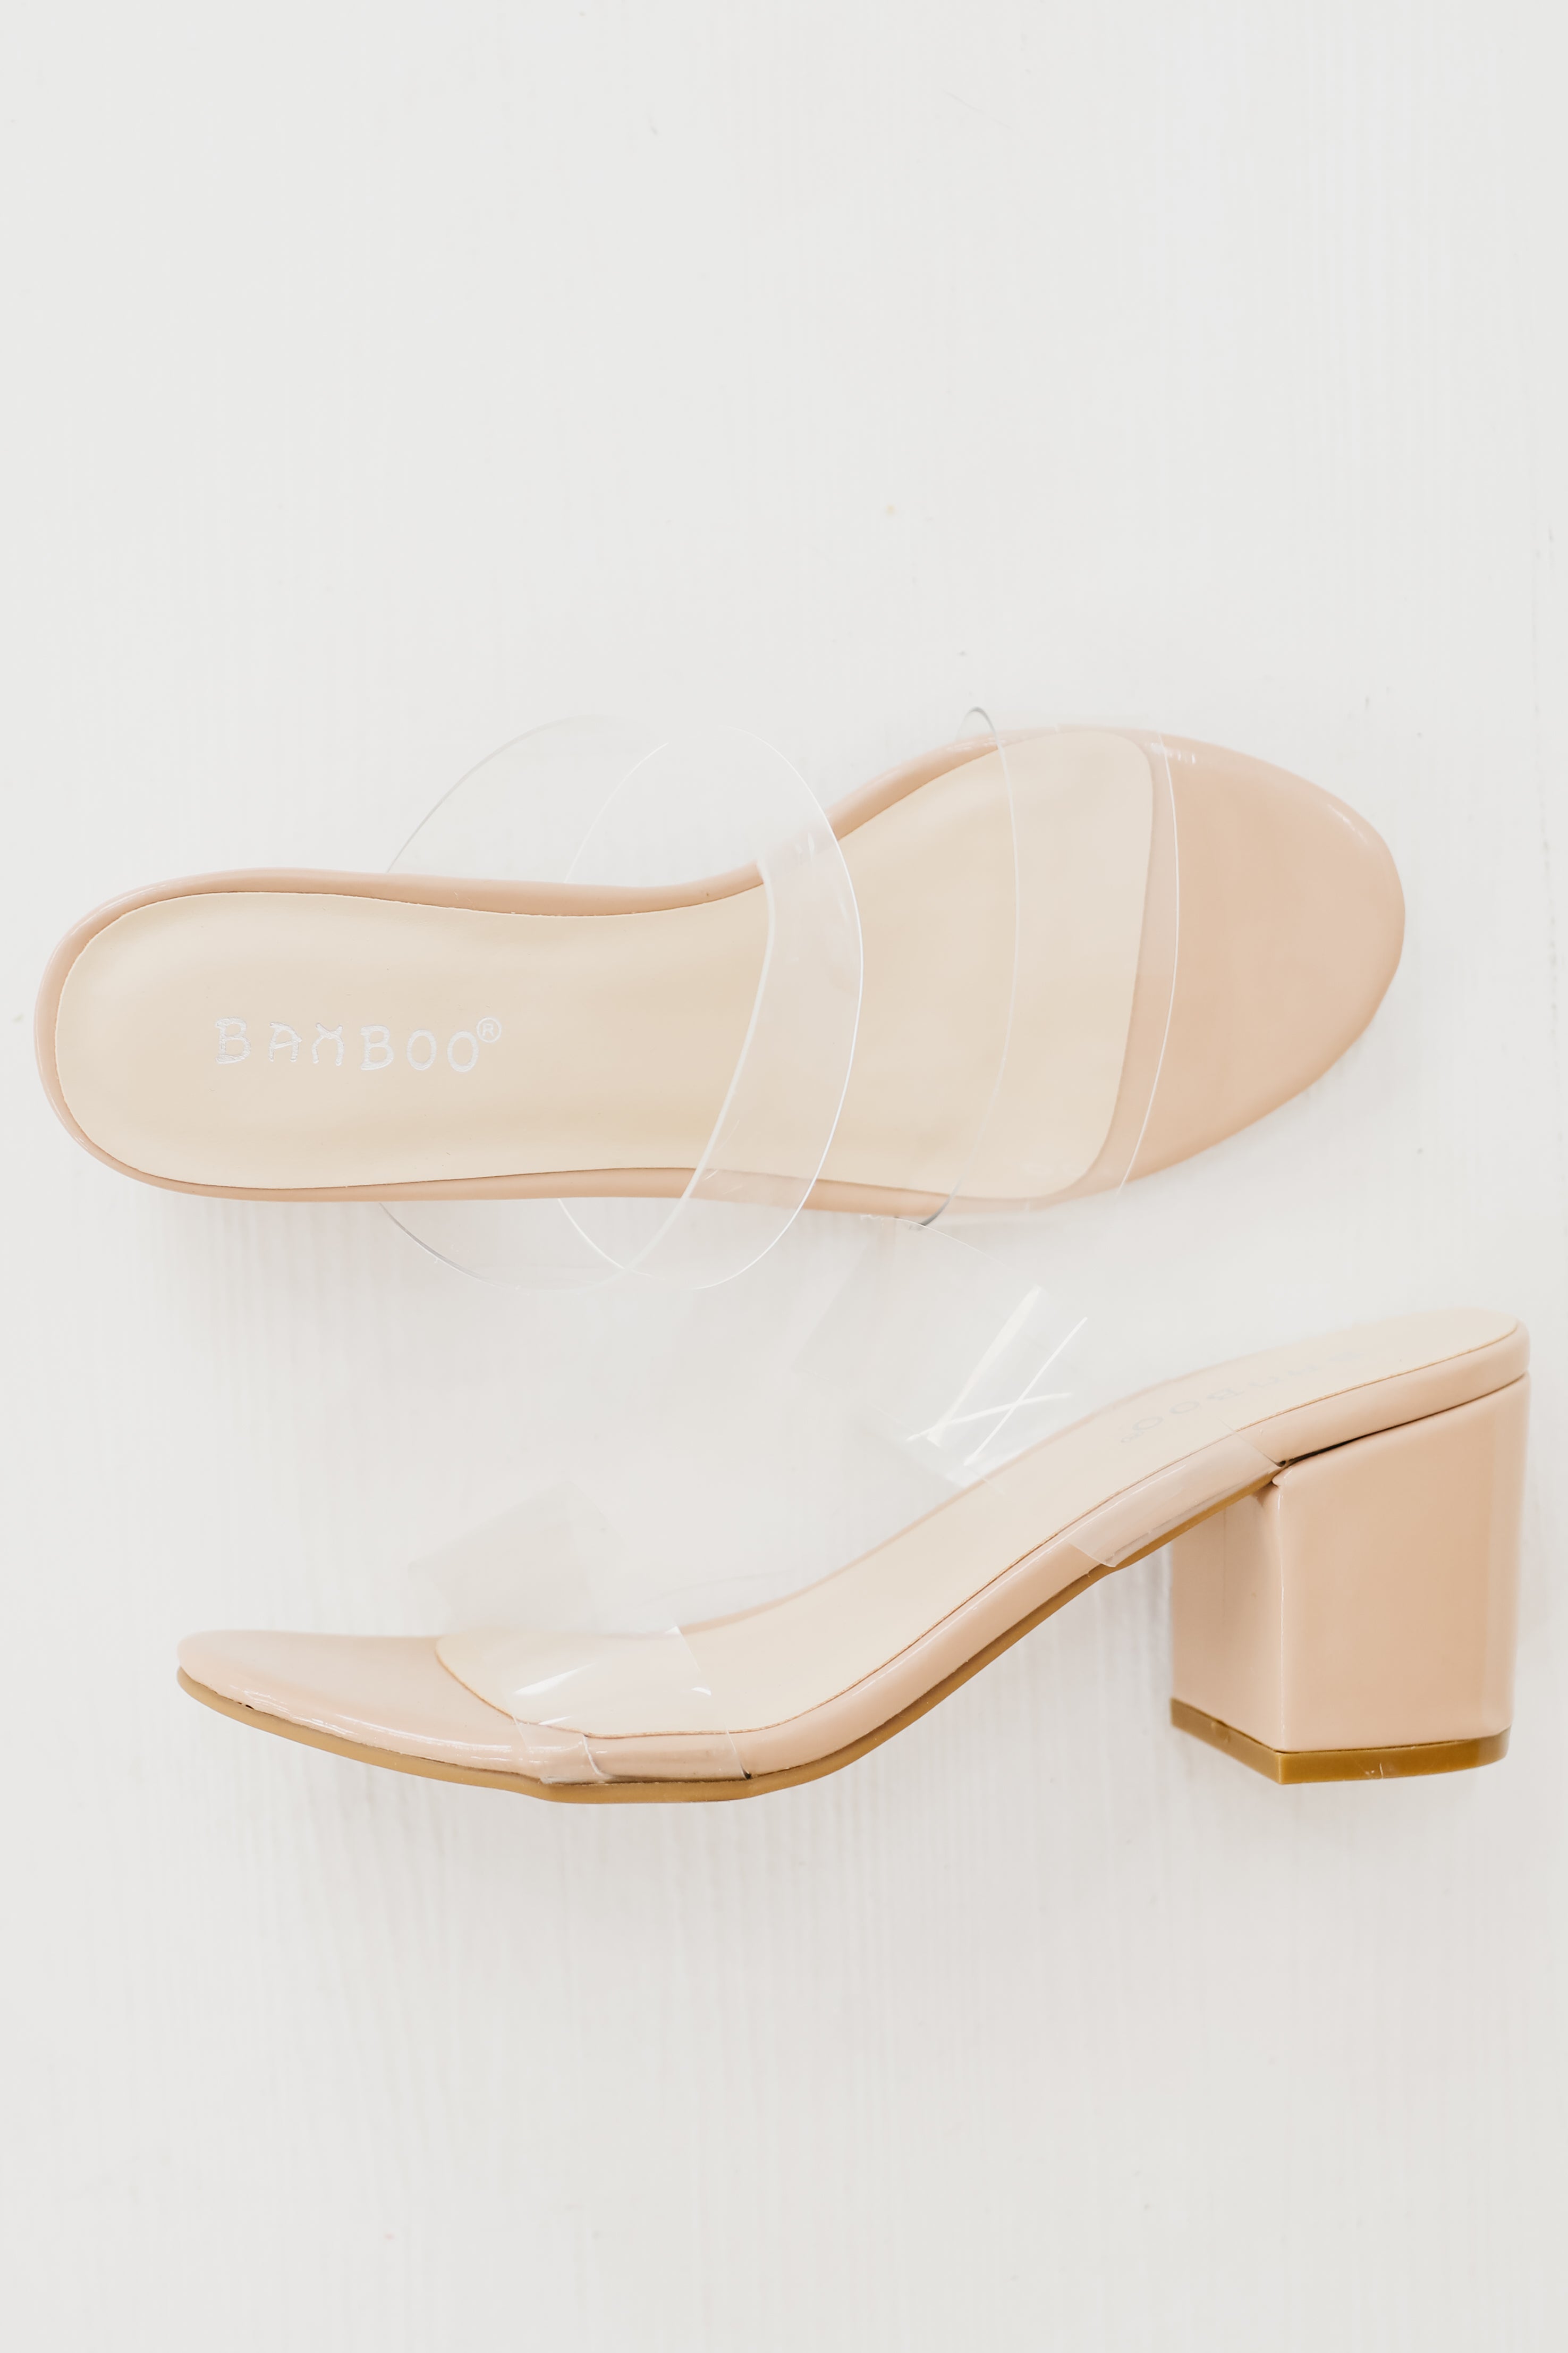 The Highlight Clear Strap Block Heel  - FINAL SALE